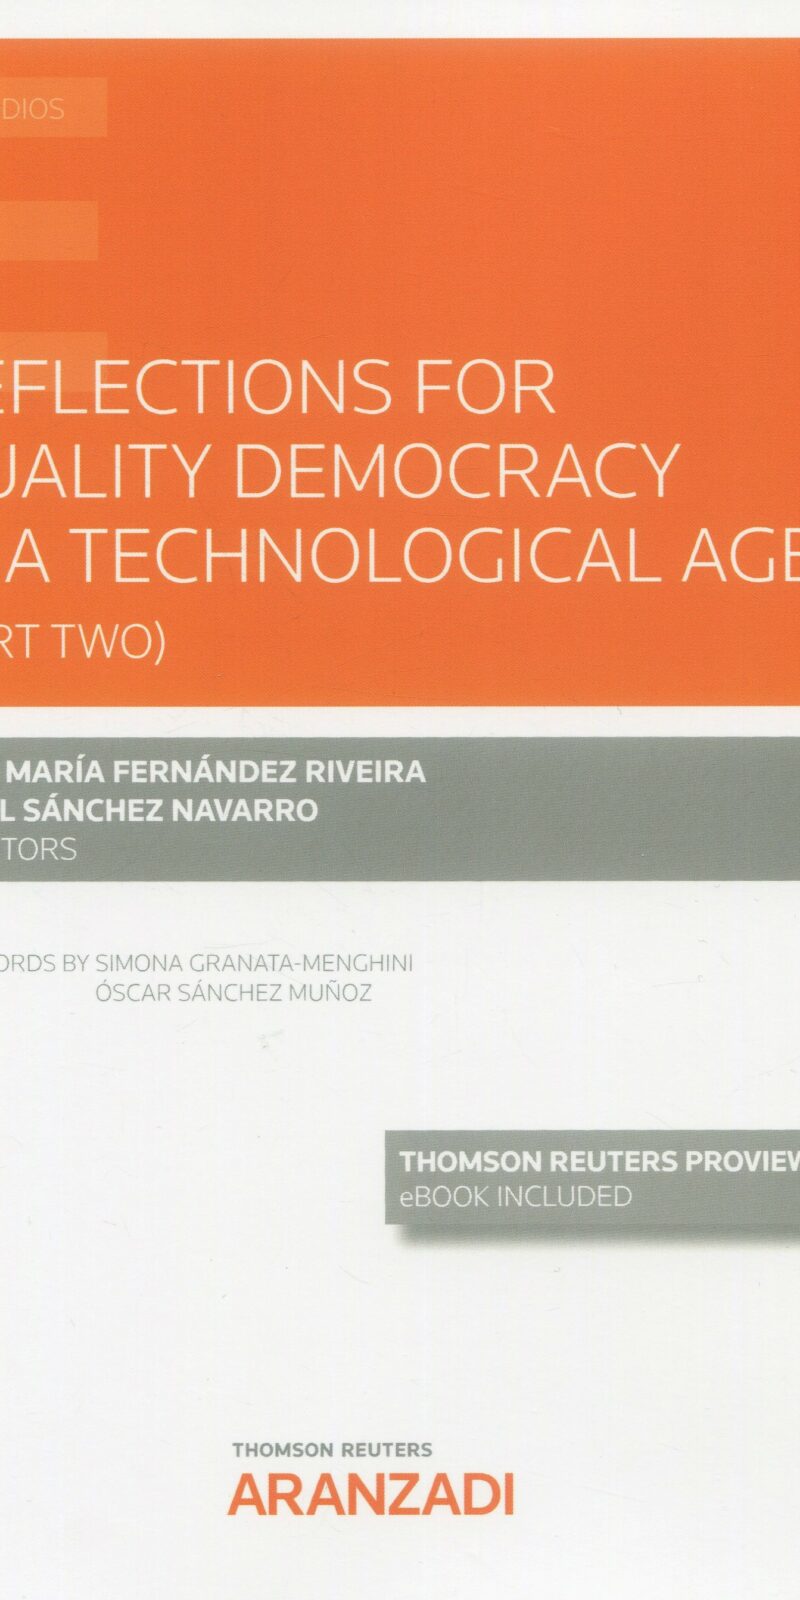 Reflections for quality democracy in a technological era 9788413917177